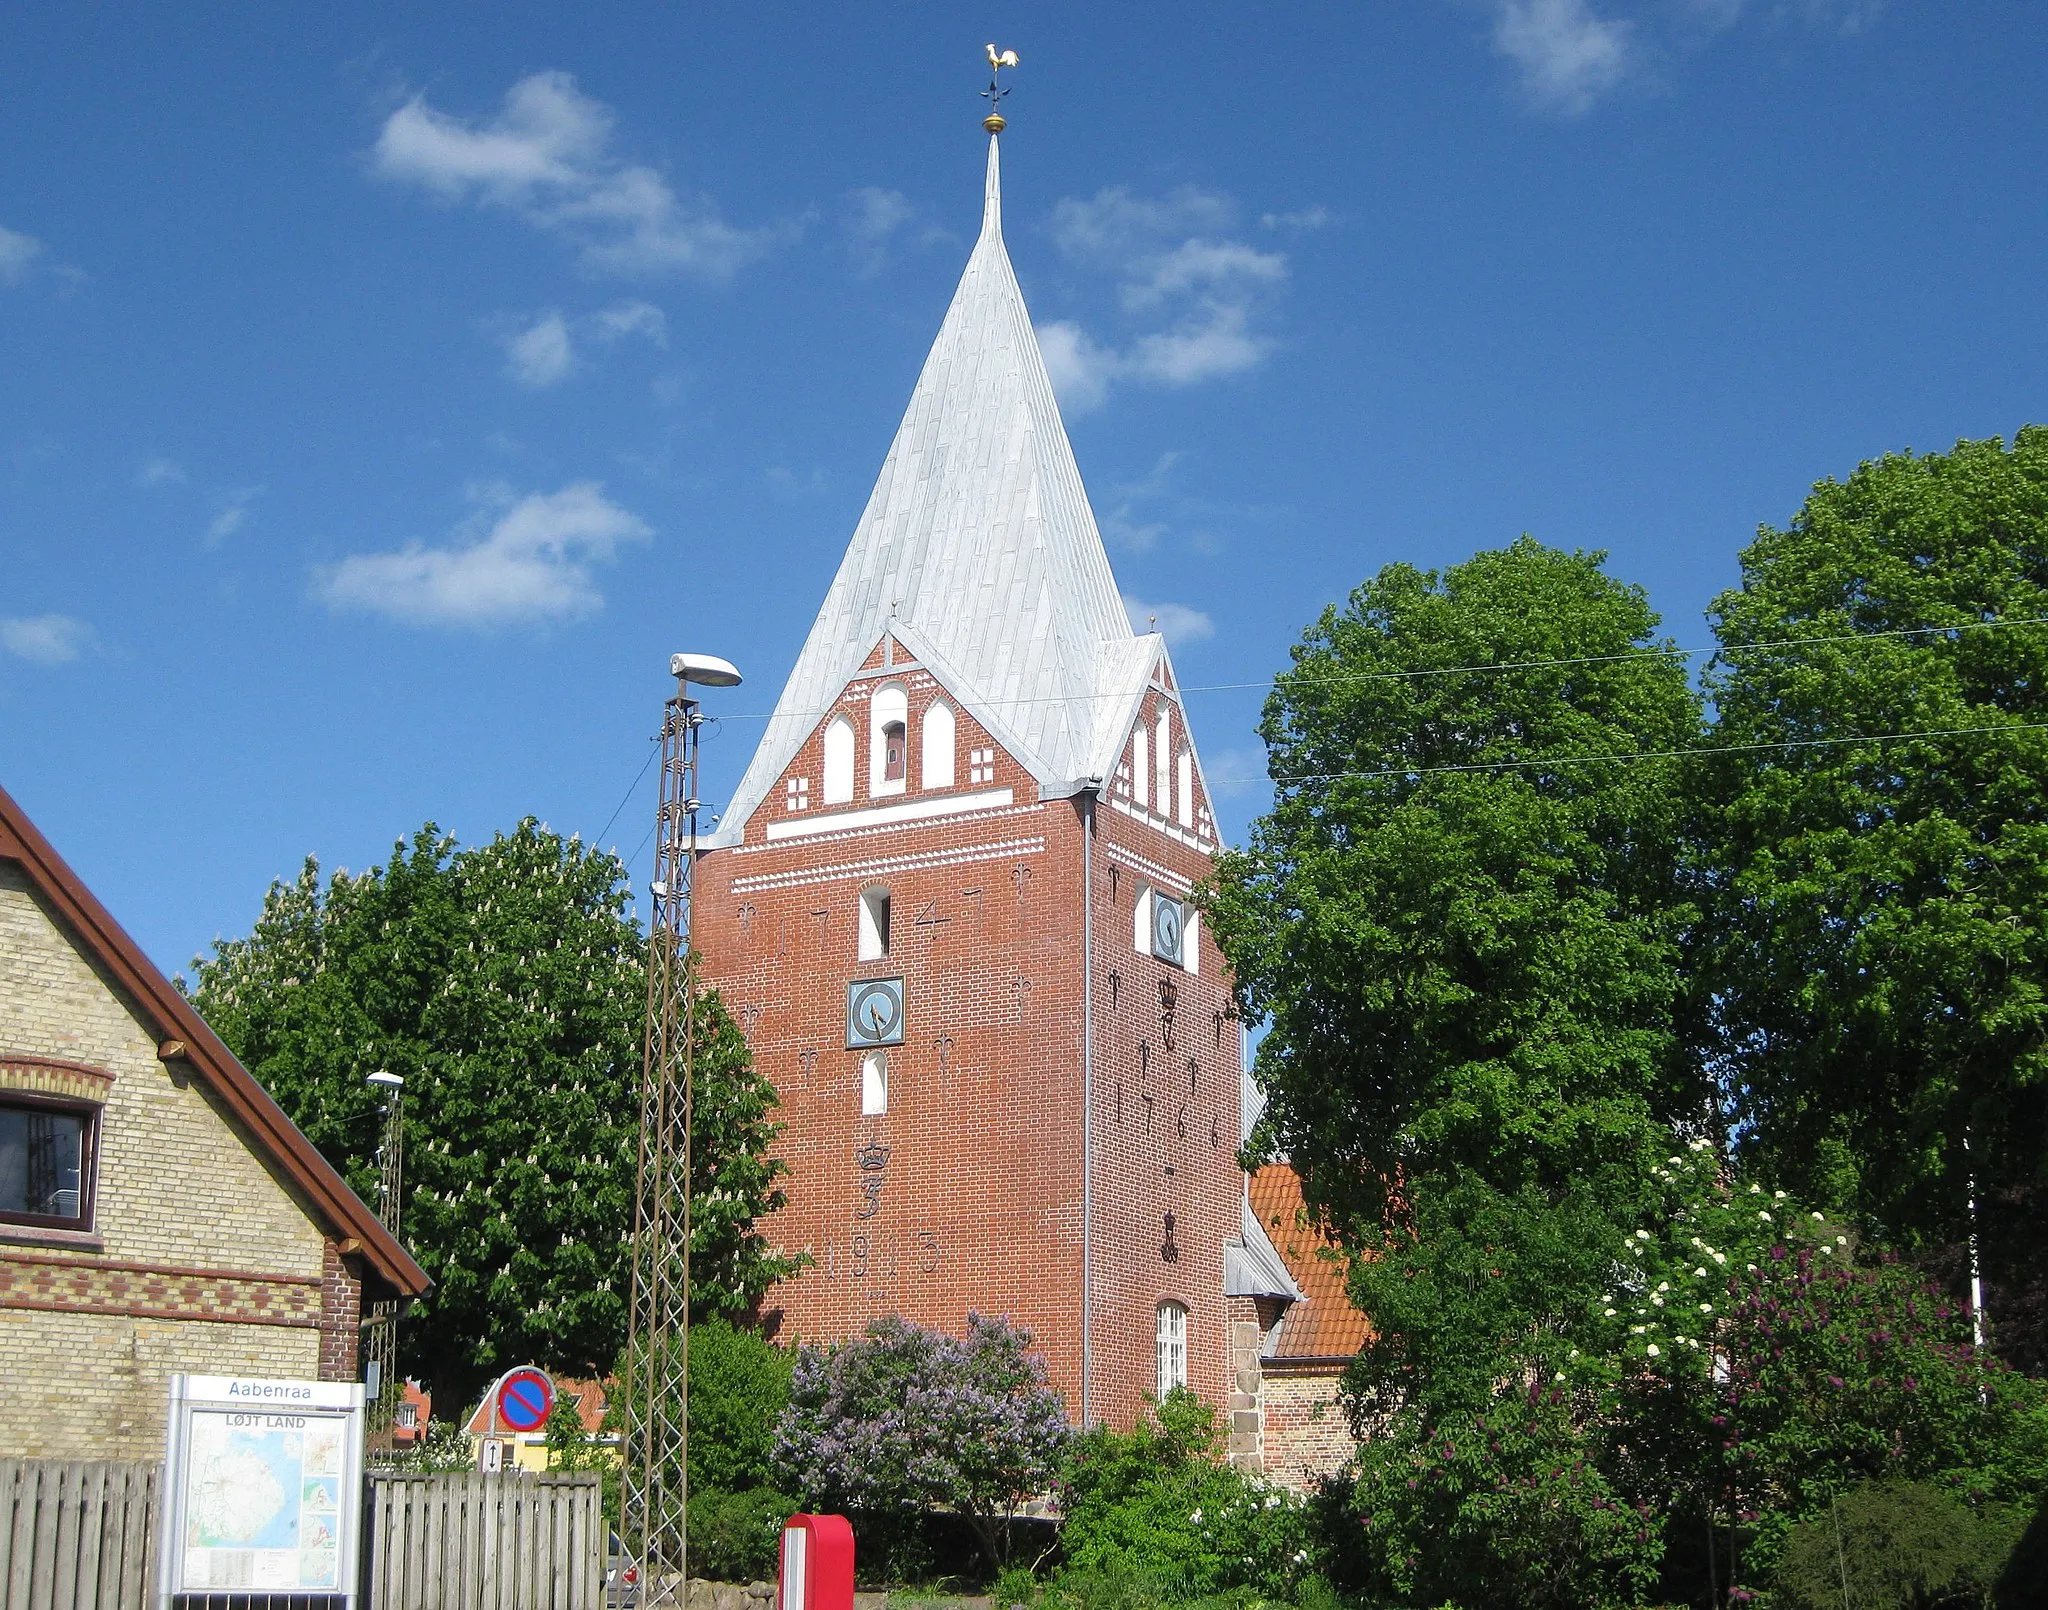 Photo showing: The church "Løjt Kirke" in the small town "Løjt Kirkeby". The town is located in Southern Jutland, Denmark.